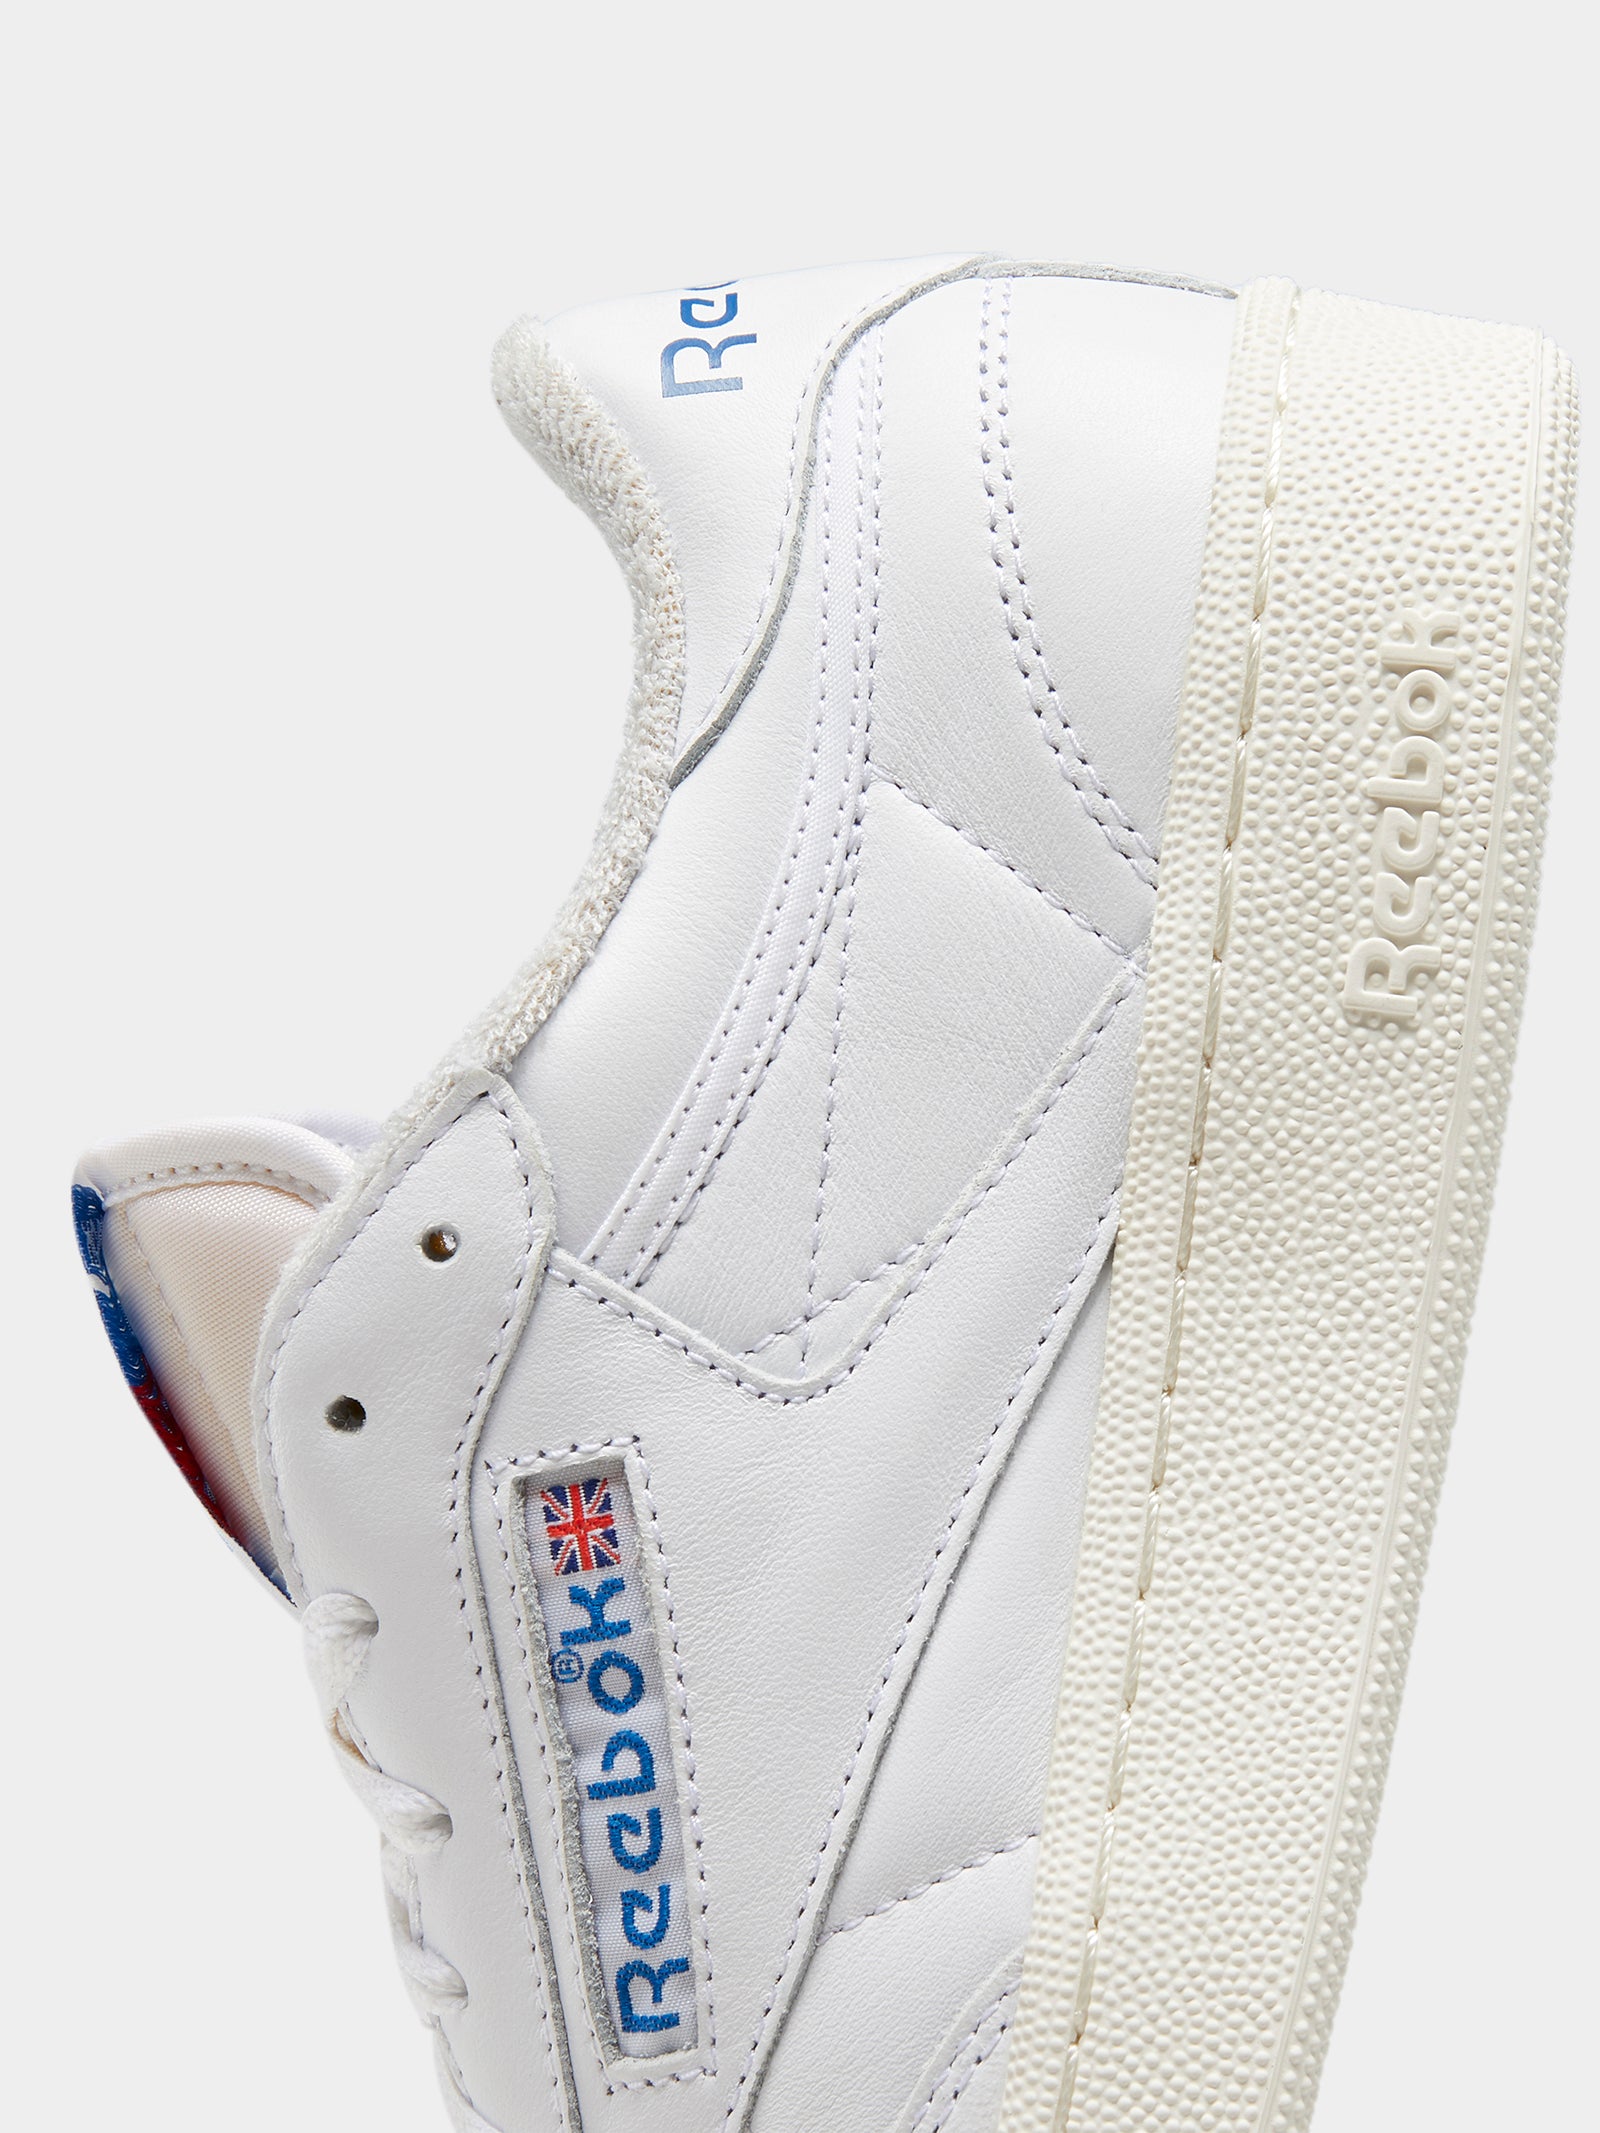 Mens Club C 85 Sneakers in White, Chalk & Vector Blue